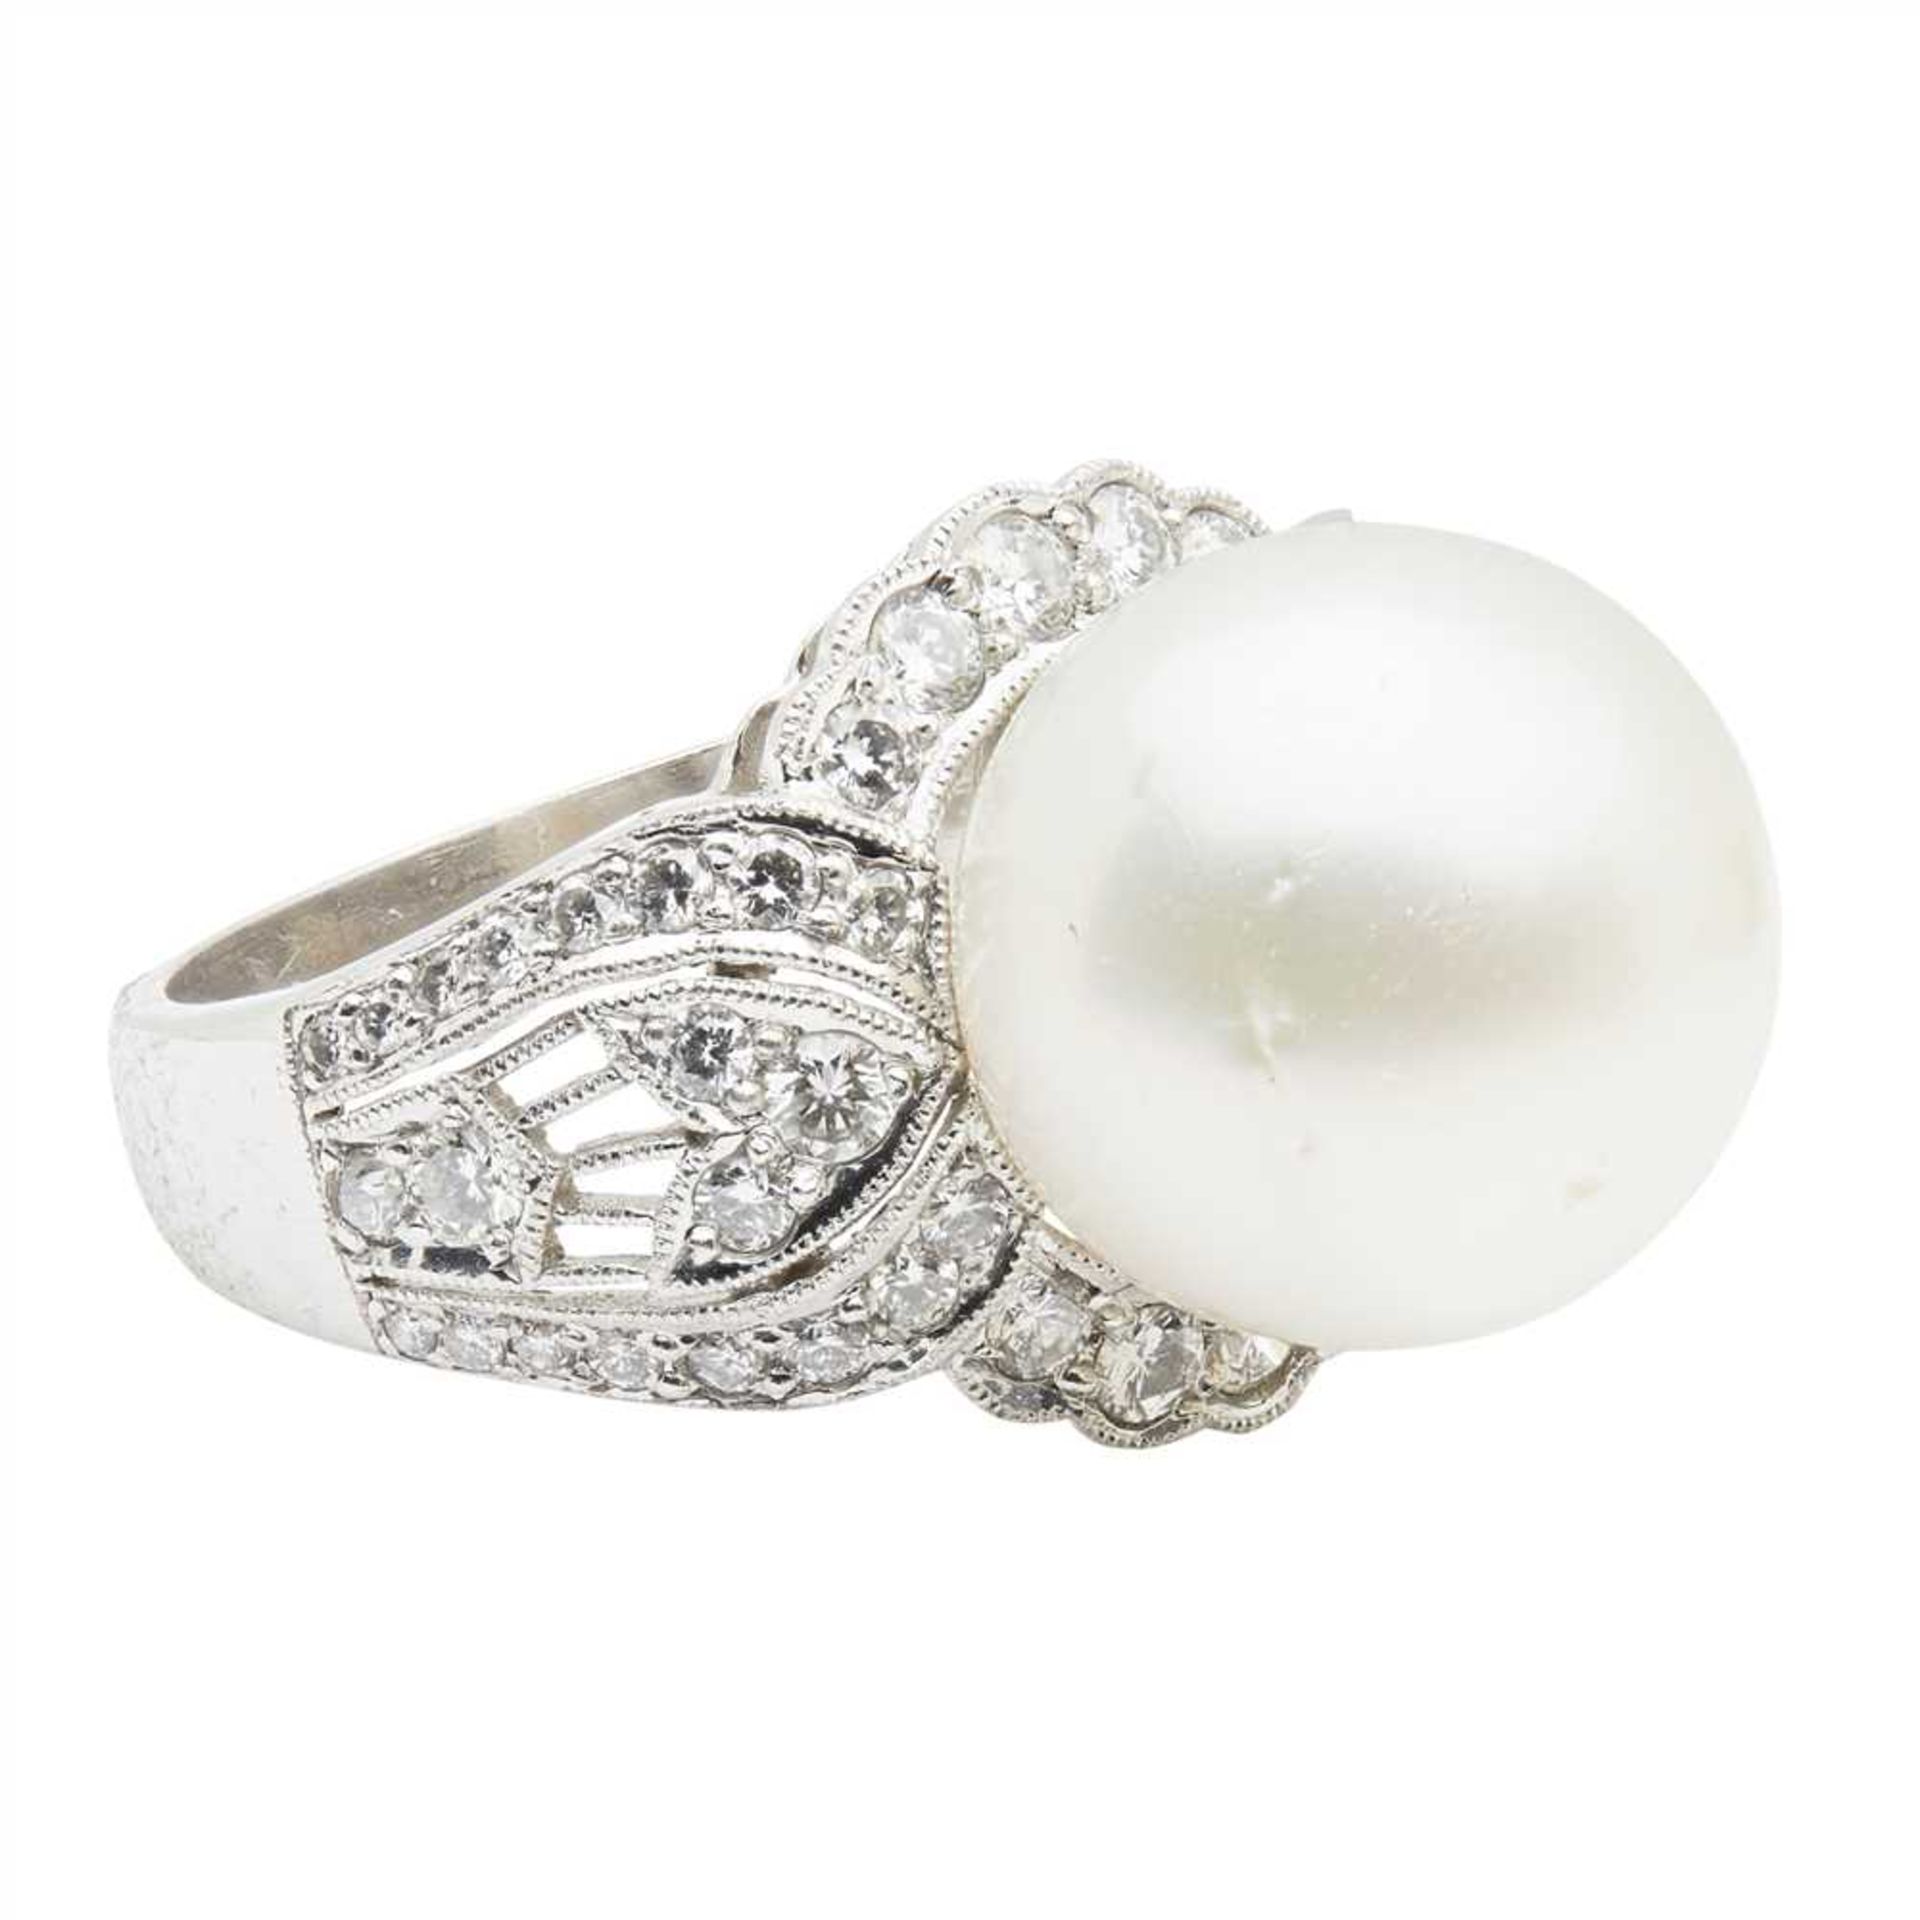 A South Sea pearl and diamond cocktail ring set with a large South Sea pearl, in a border of small - Image 2 of 2